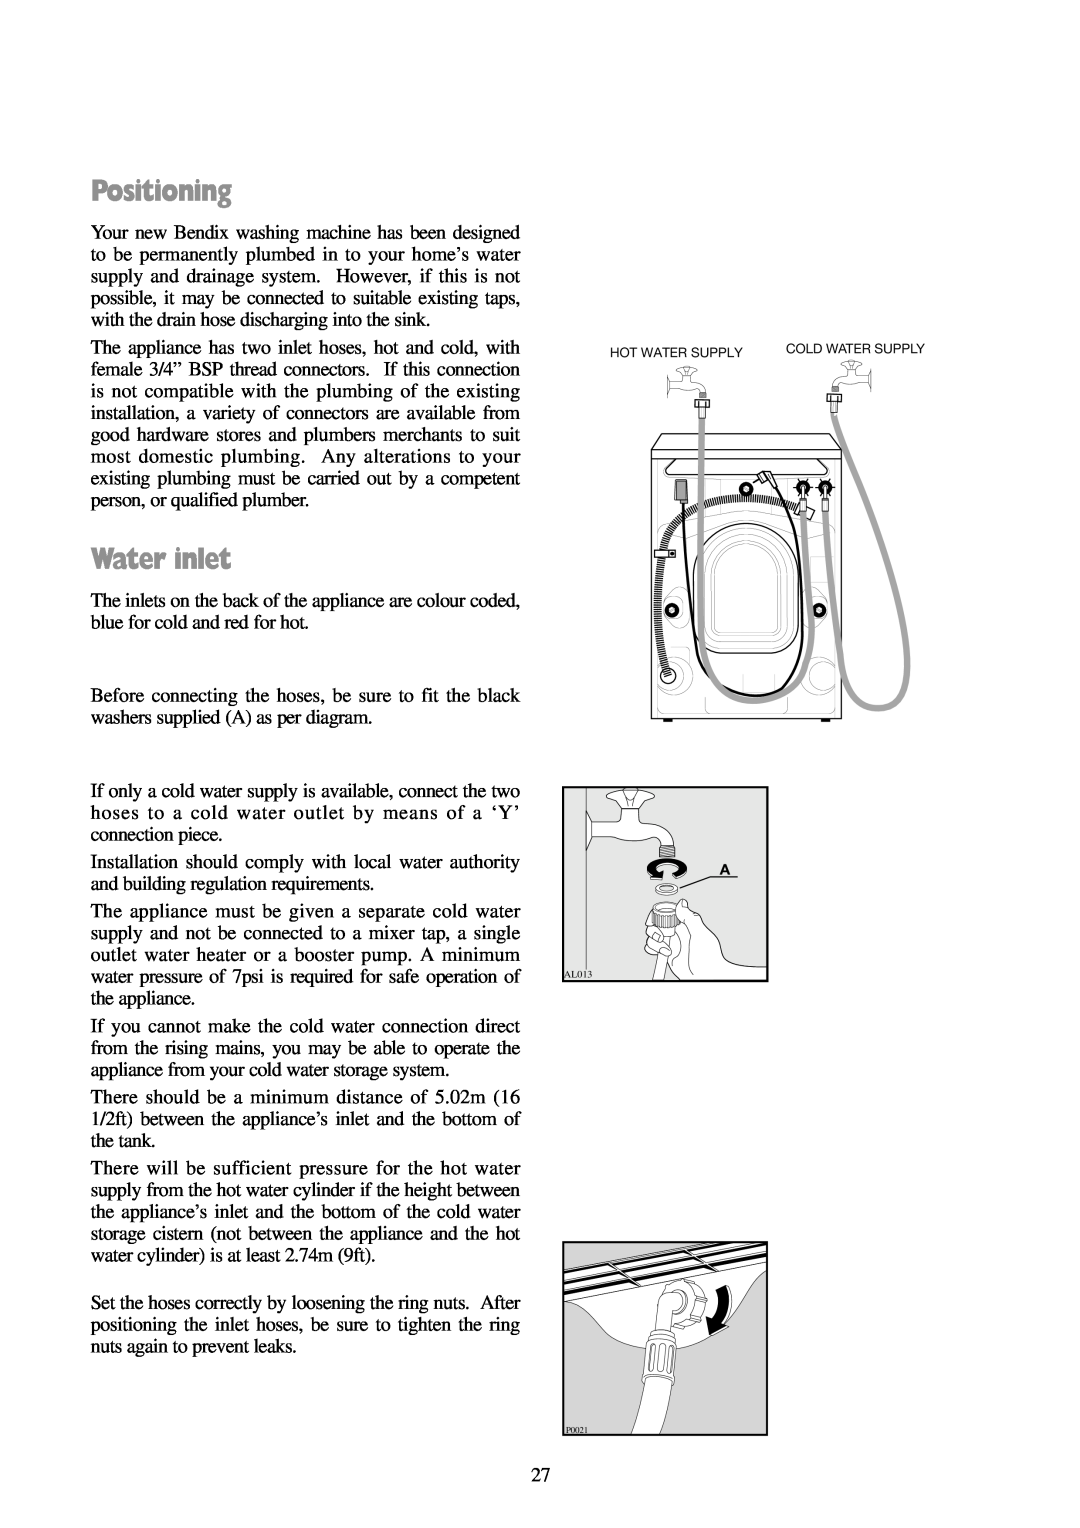 Tricity Bendix BIW 102 installation instructions Positioning, Water inlet 